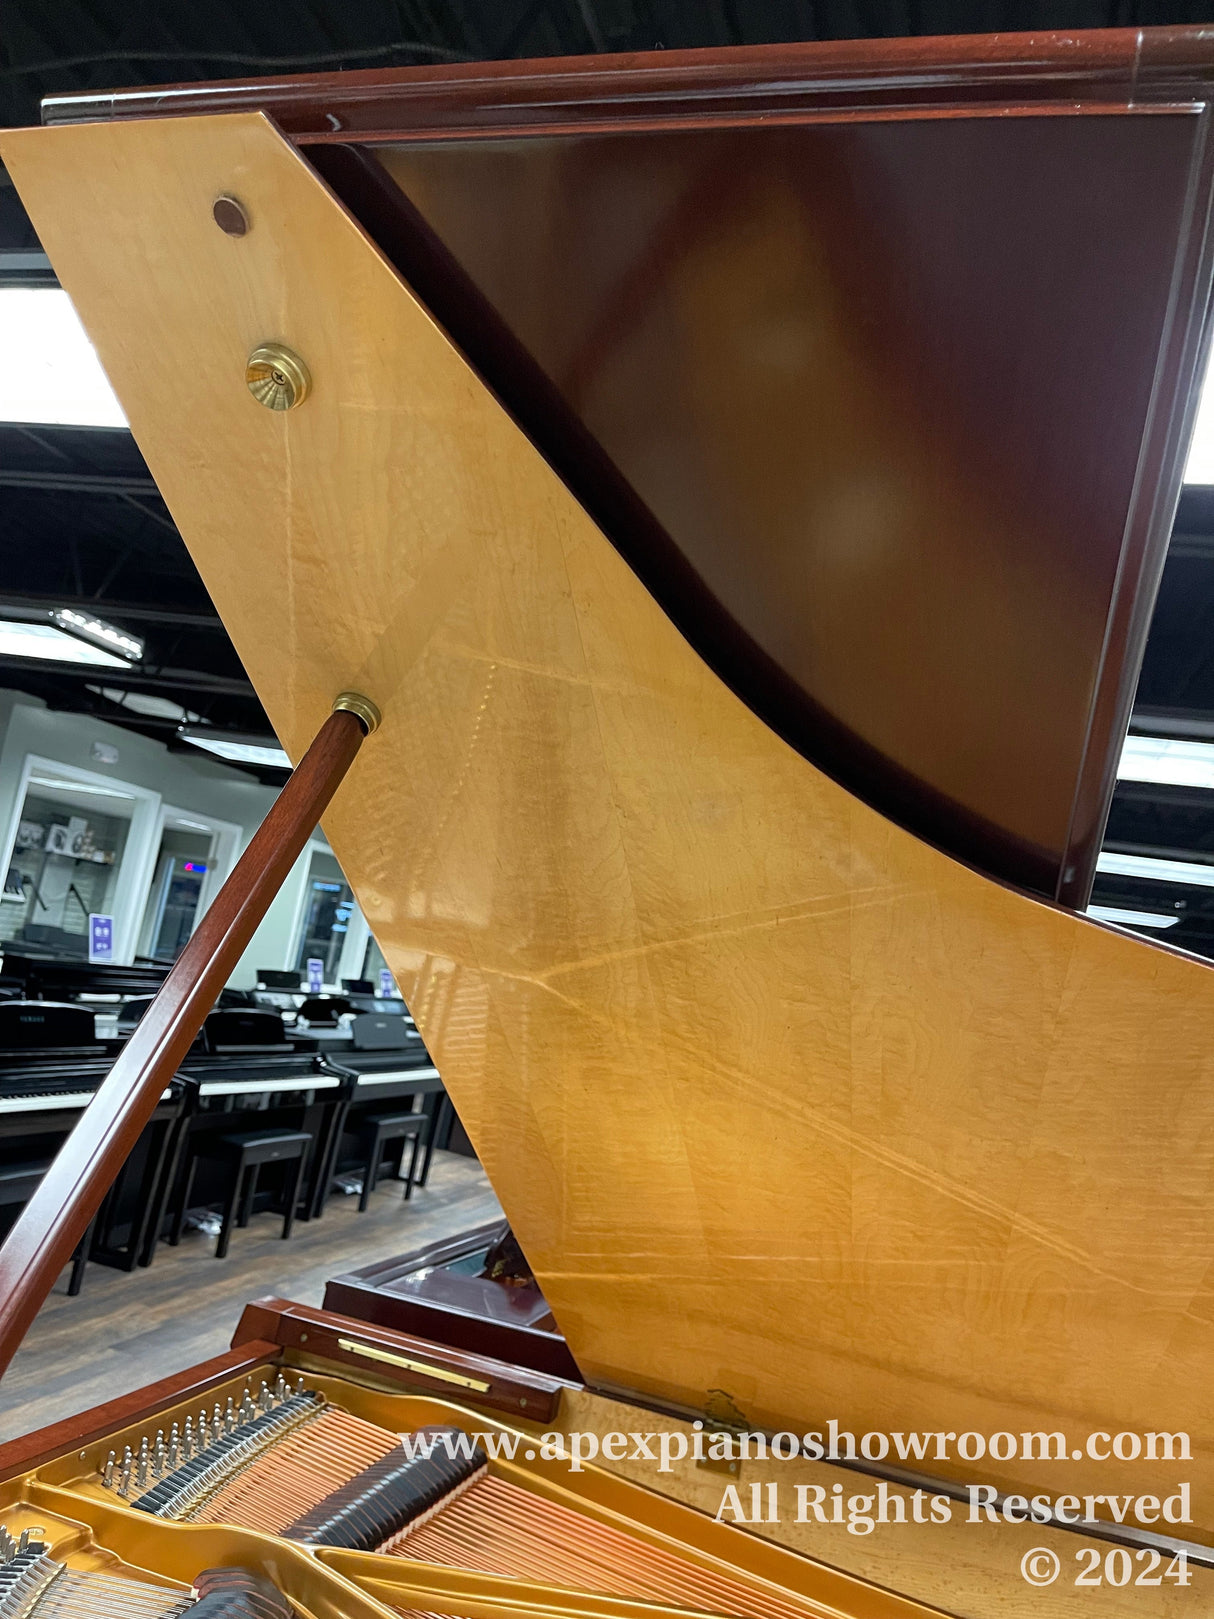 A close-up view of an open grand piano displaying its high-gloss wooden finish, intricate internal string mechanism, and a partial view of the keyboard, situated in a piano showroom with other pianos in the background.